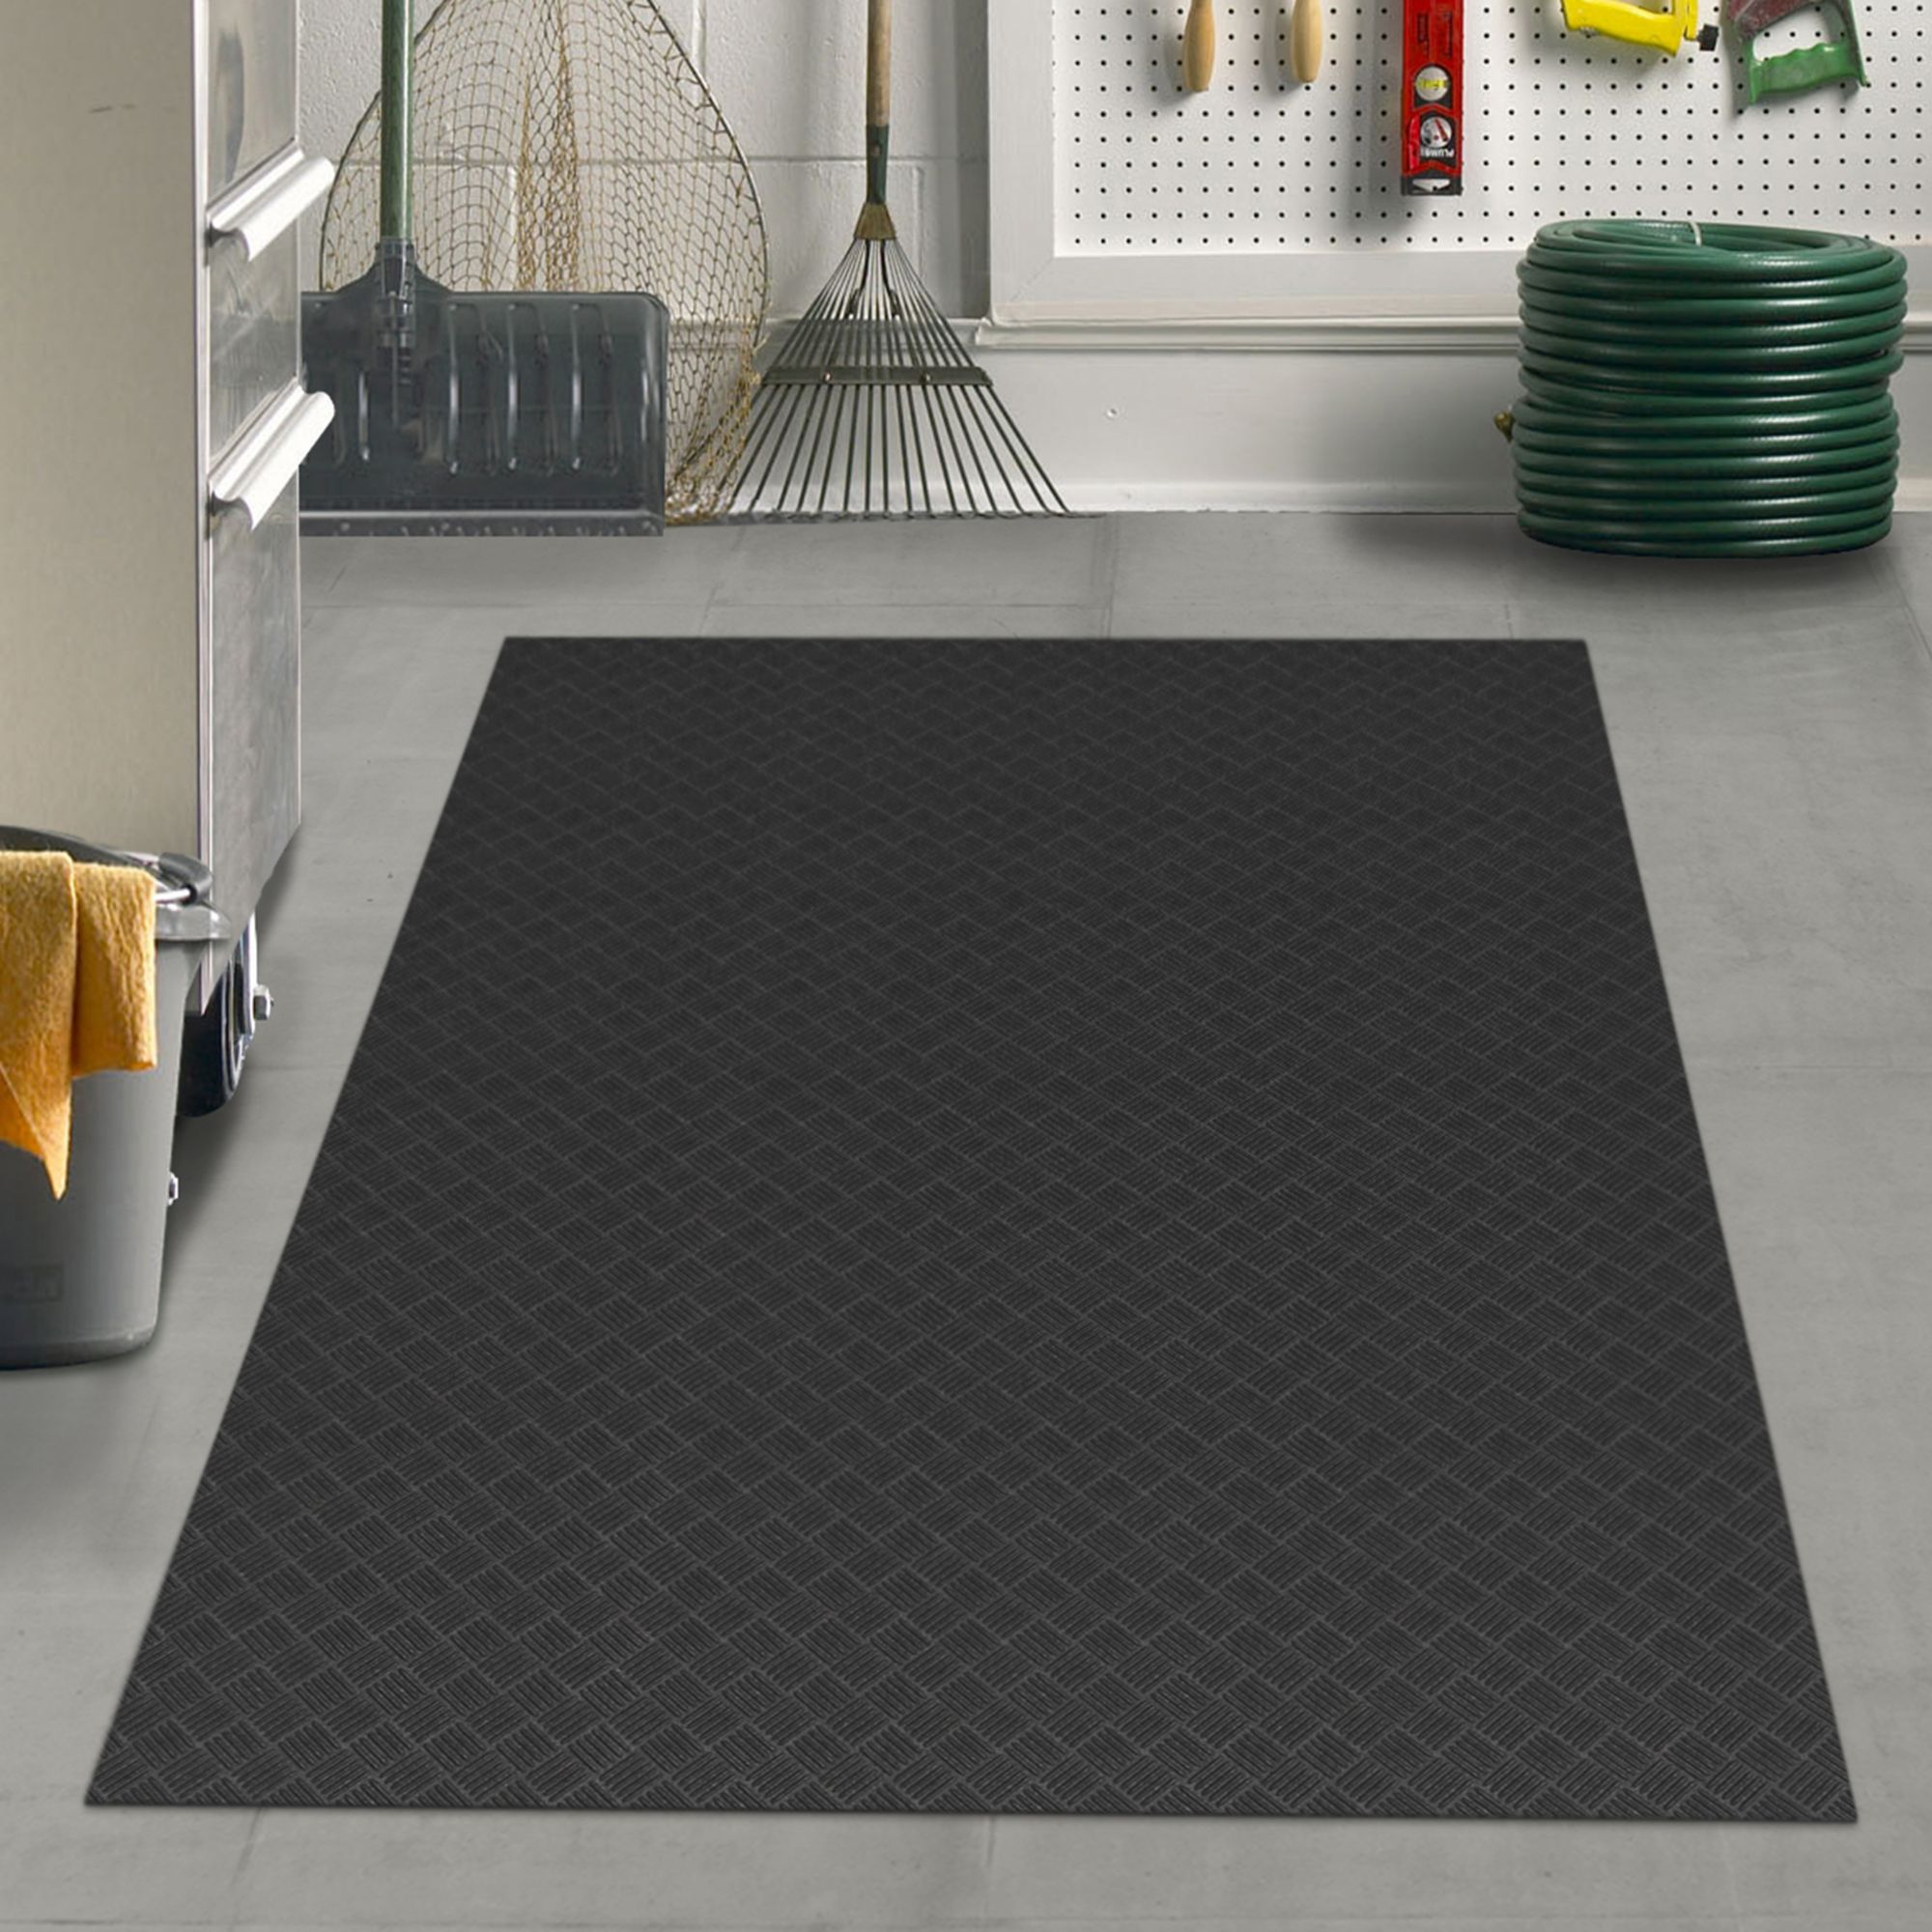 Black 48 in. x 72 in. Recycled Rubber Commercial Door Mat - take-a